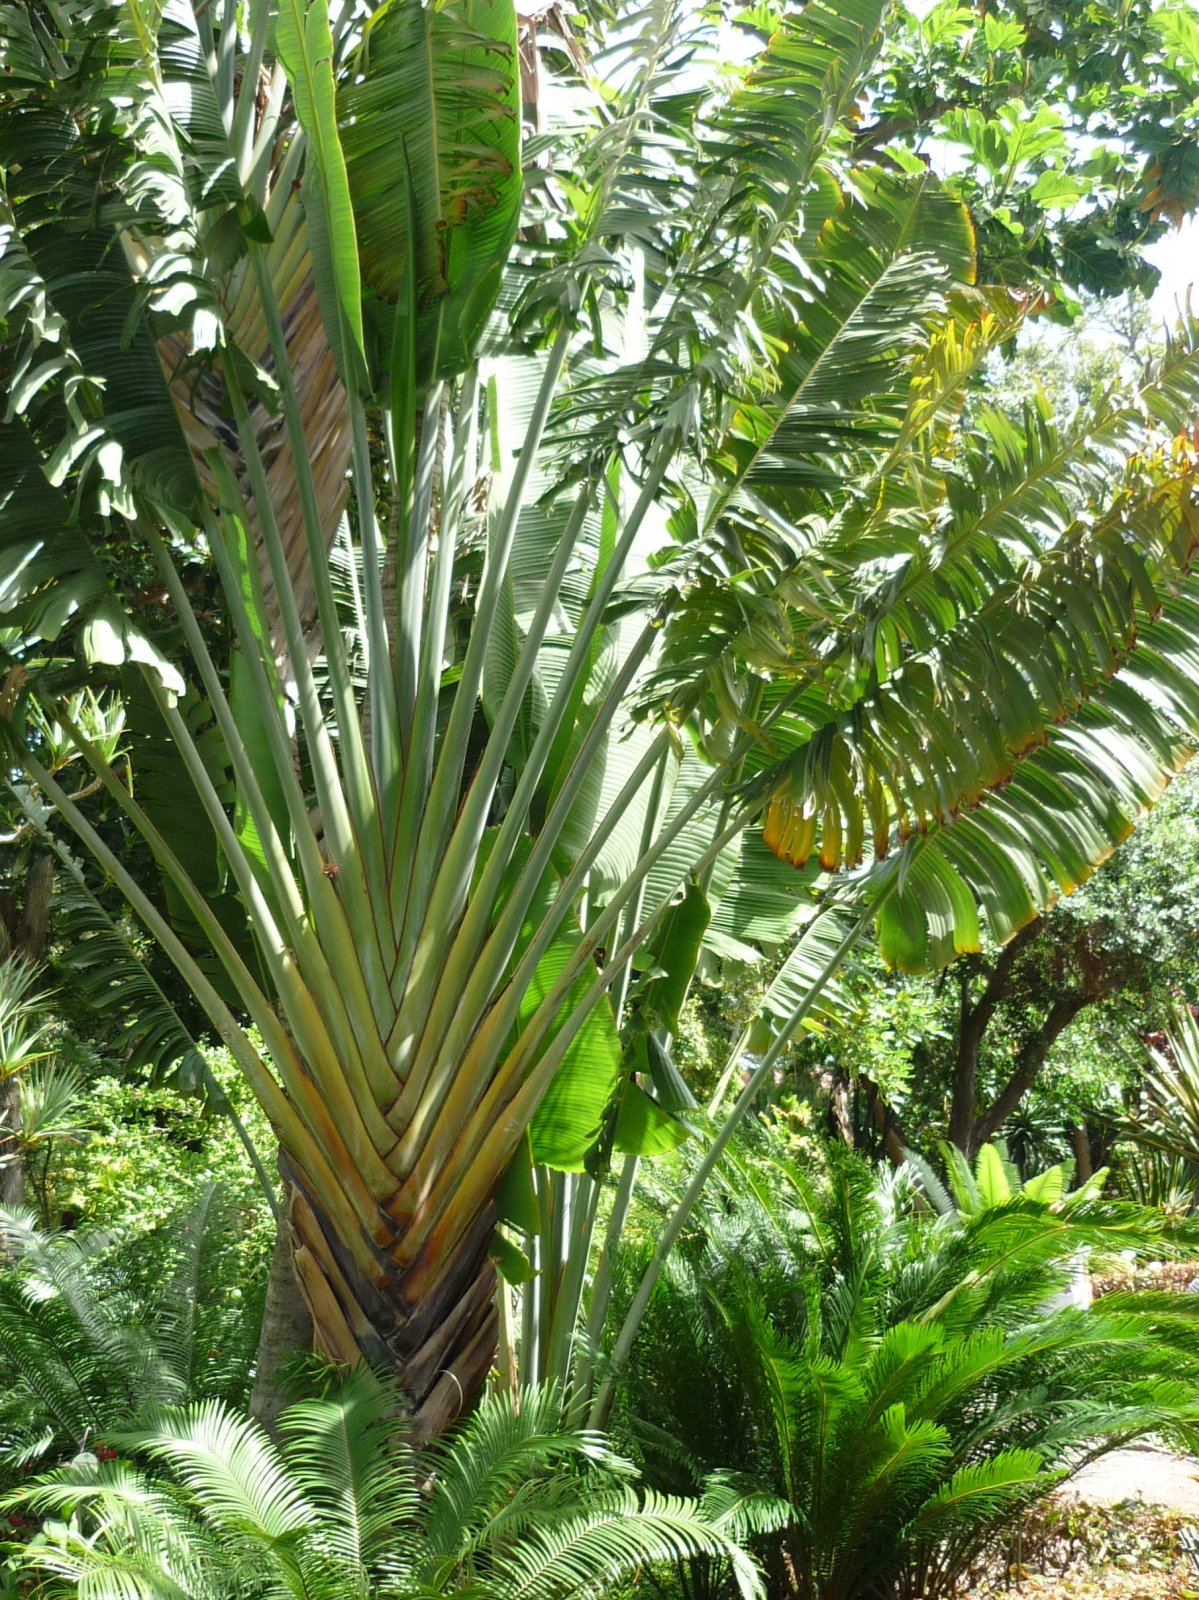 green plant and leaves in the jungle setting